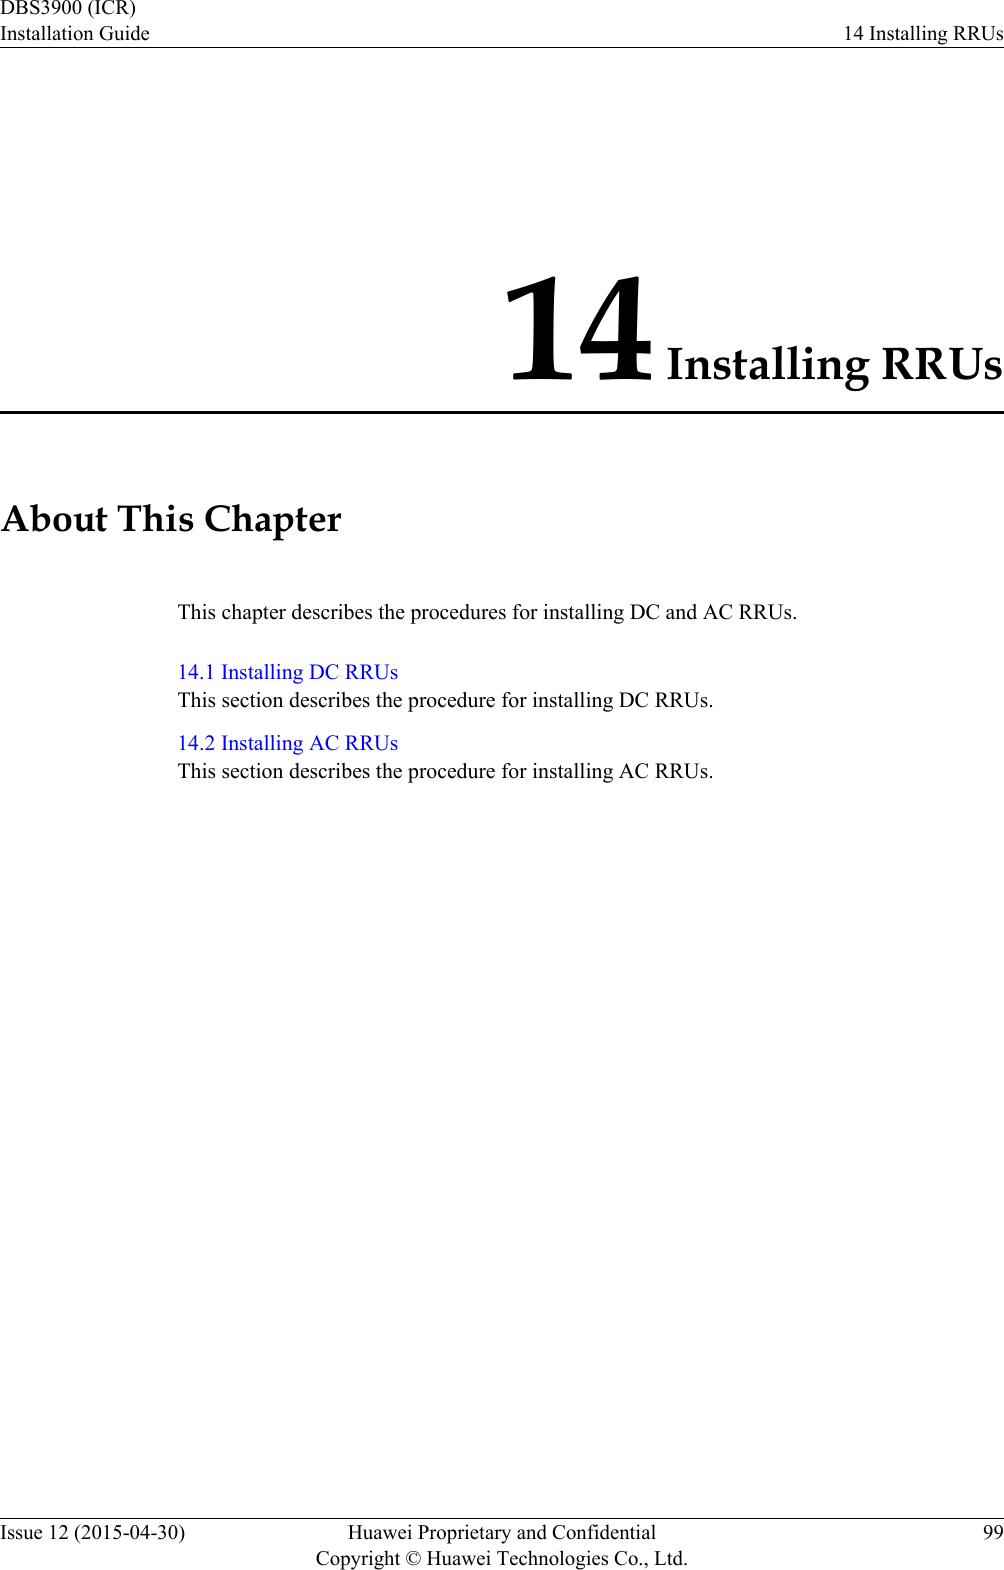 14 Installing RRUsAbout This ChapterThis chapter describes the procedures for installing DC and AC RRUs.14.1 Installing DC RRUsThis section describes the procedure for installing DC RRUs.14.2 Installing AC RRUsThis section describes the procedure for installing AC RRUs.DBS3900 (ICR)Installation Guide 14 Installing RRUsIssue 12 (2015-04-30) Huawei Proprietary and ConfidentialCopyright © Huawei Technologies Co., Ltd.99